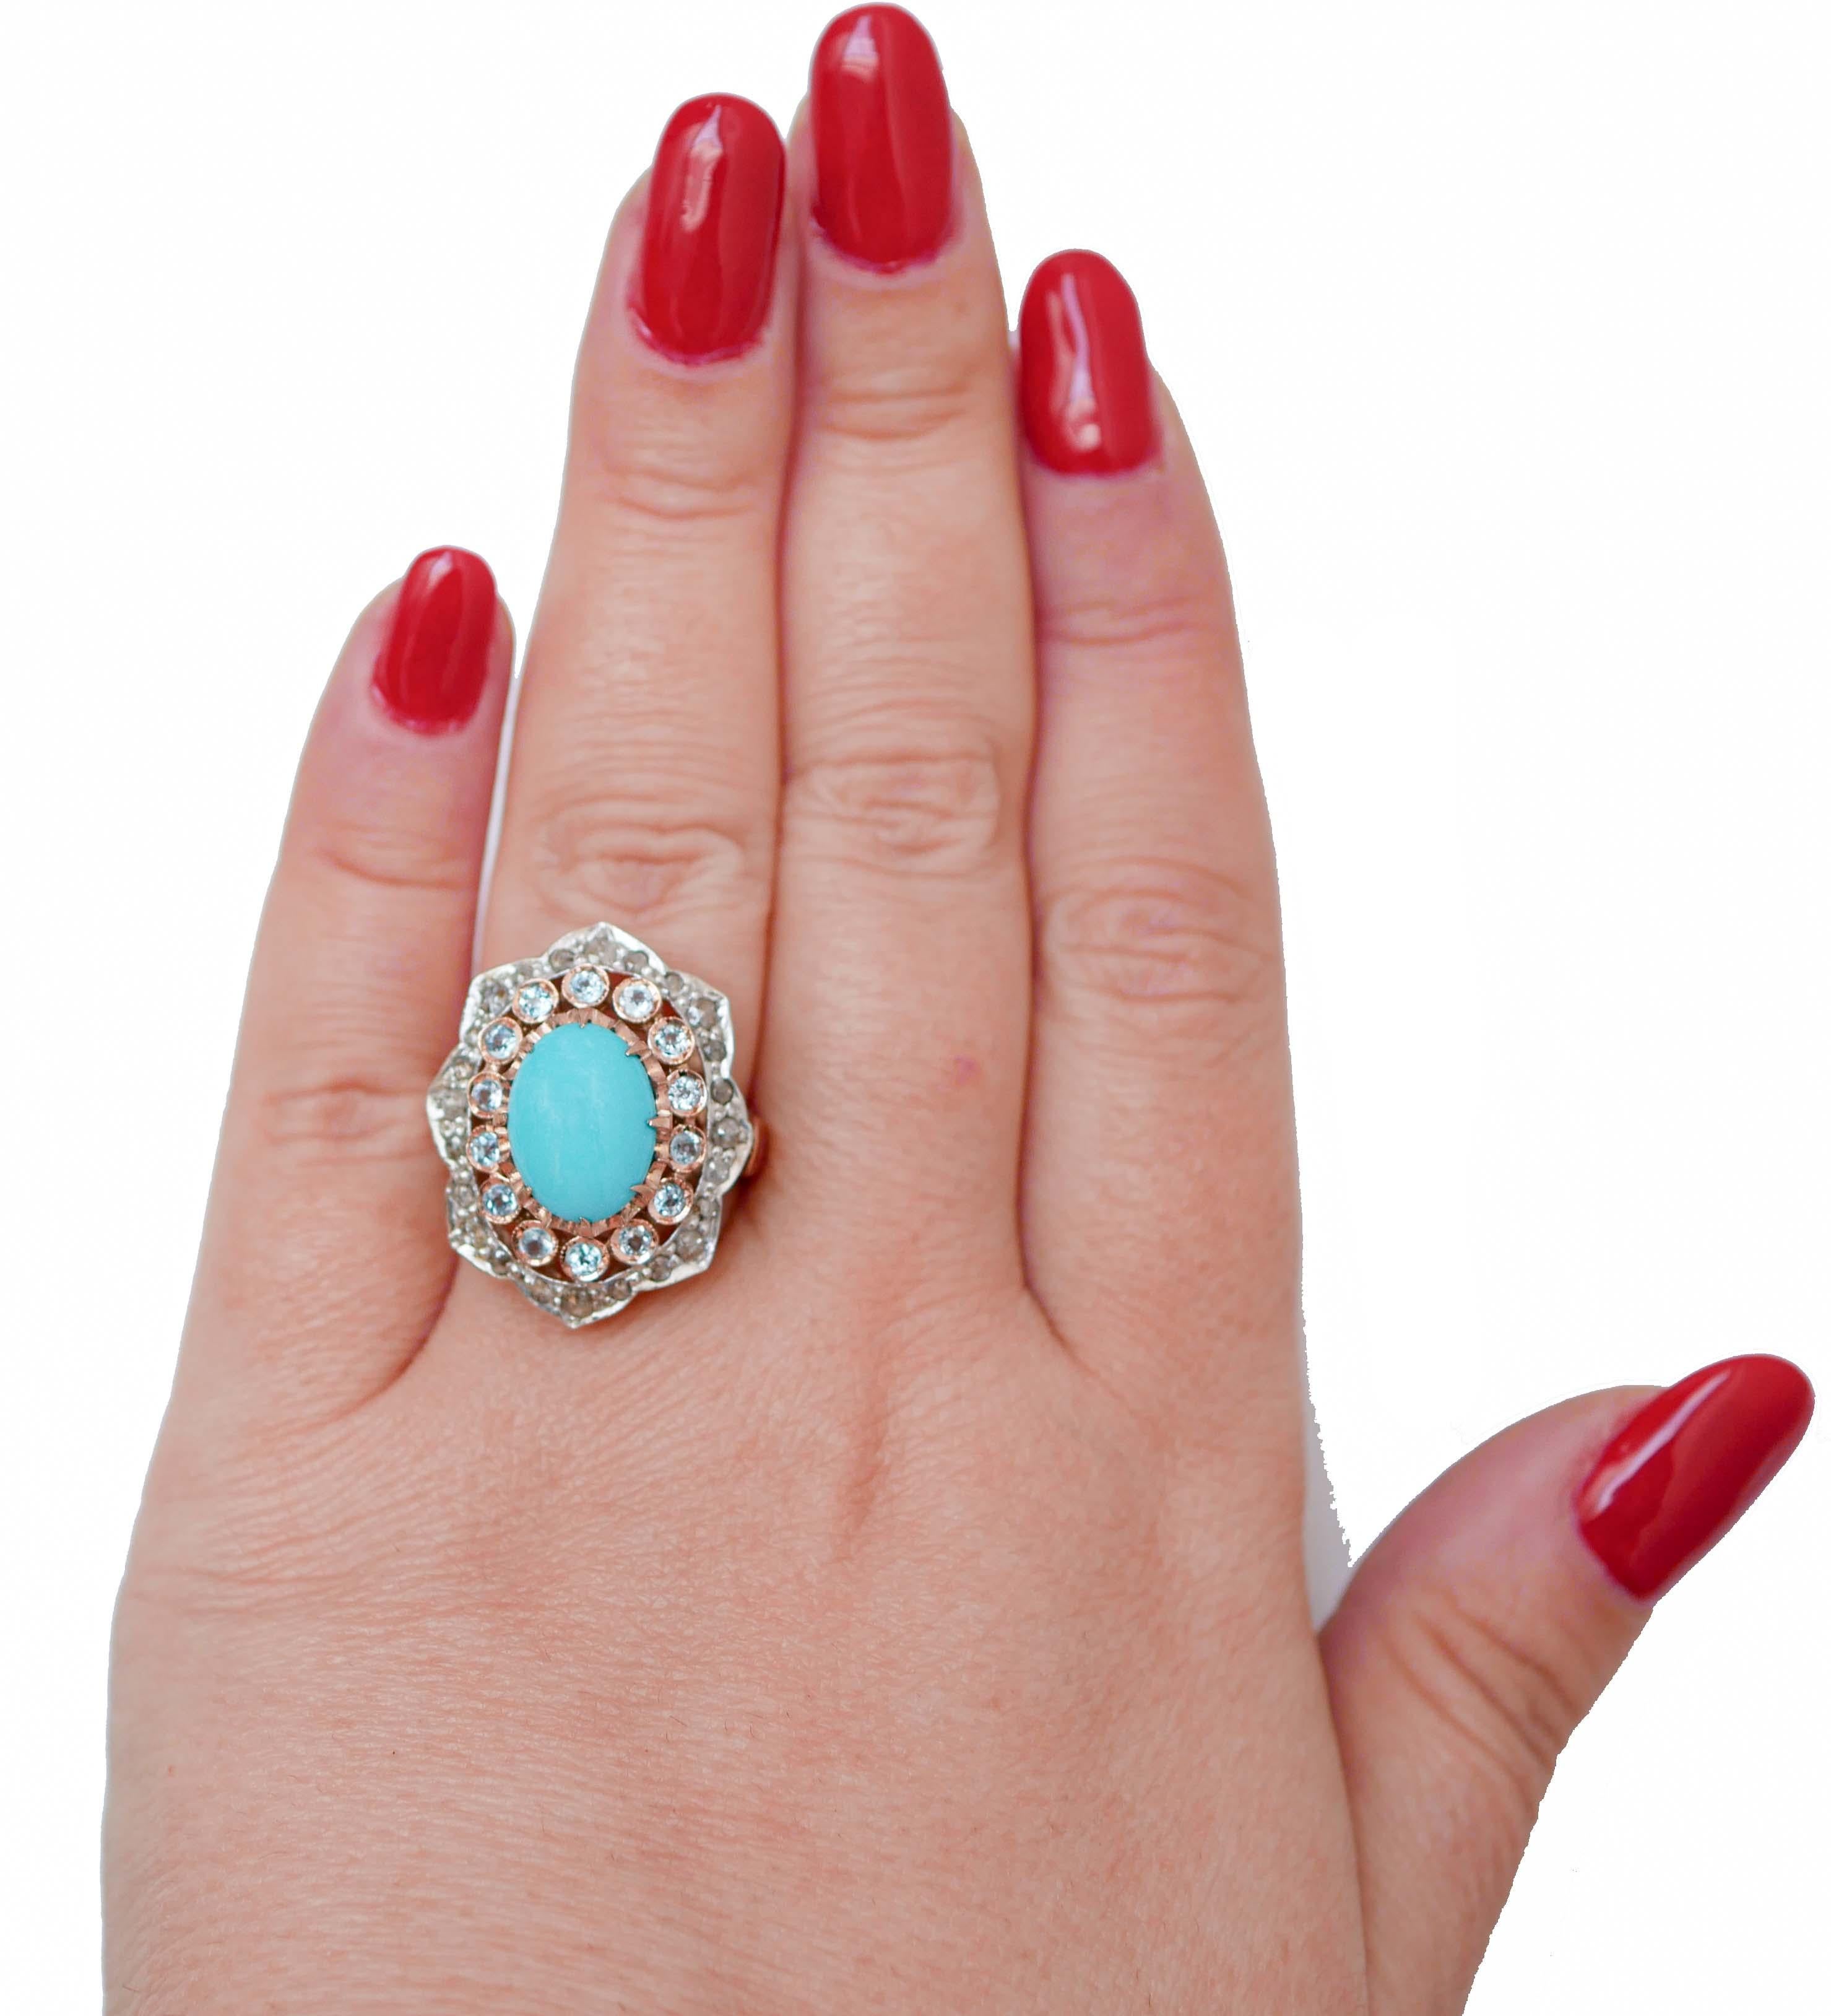 Mixed Cut Turquoise, Aquamarine, Diamonds, 14 Karat Rose Gold and Silver Ring. For Sale